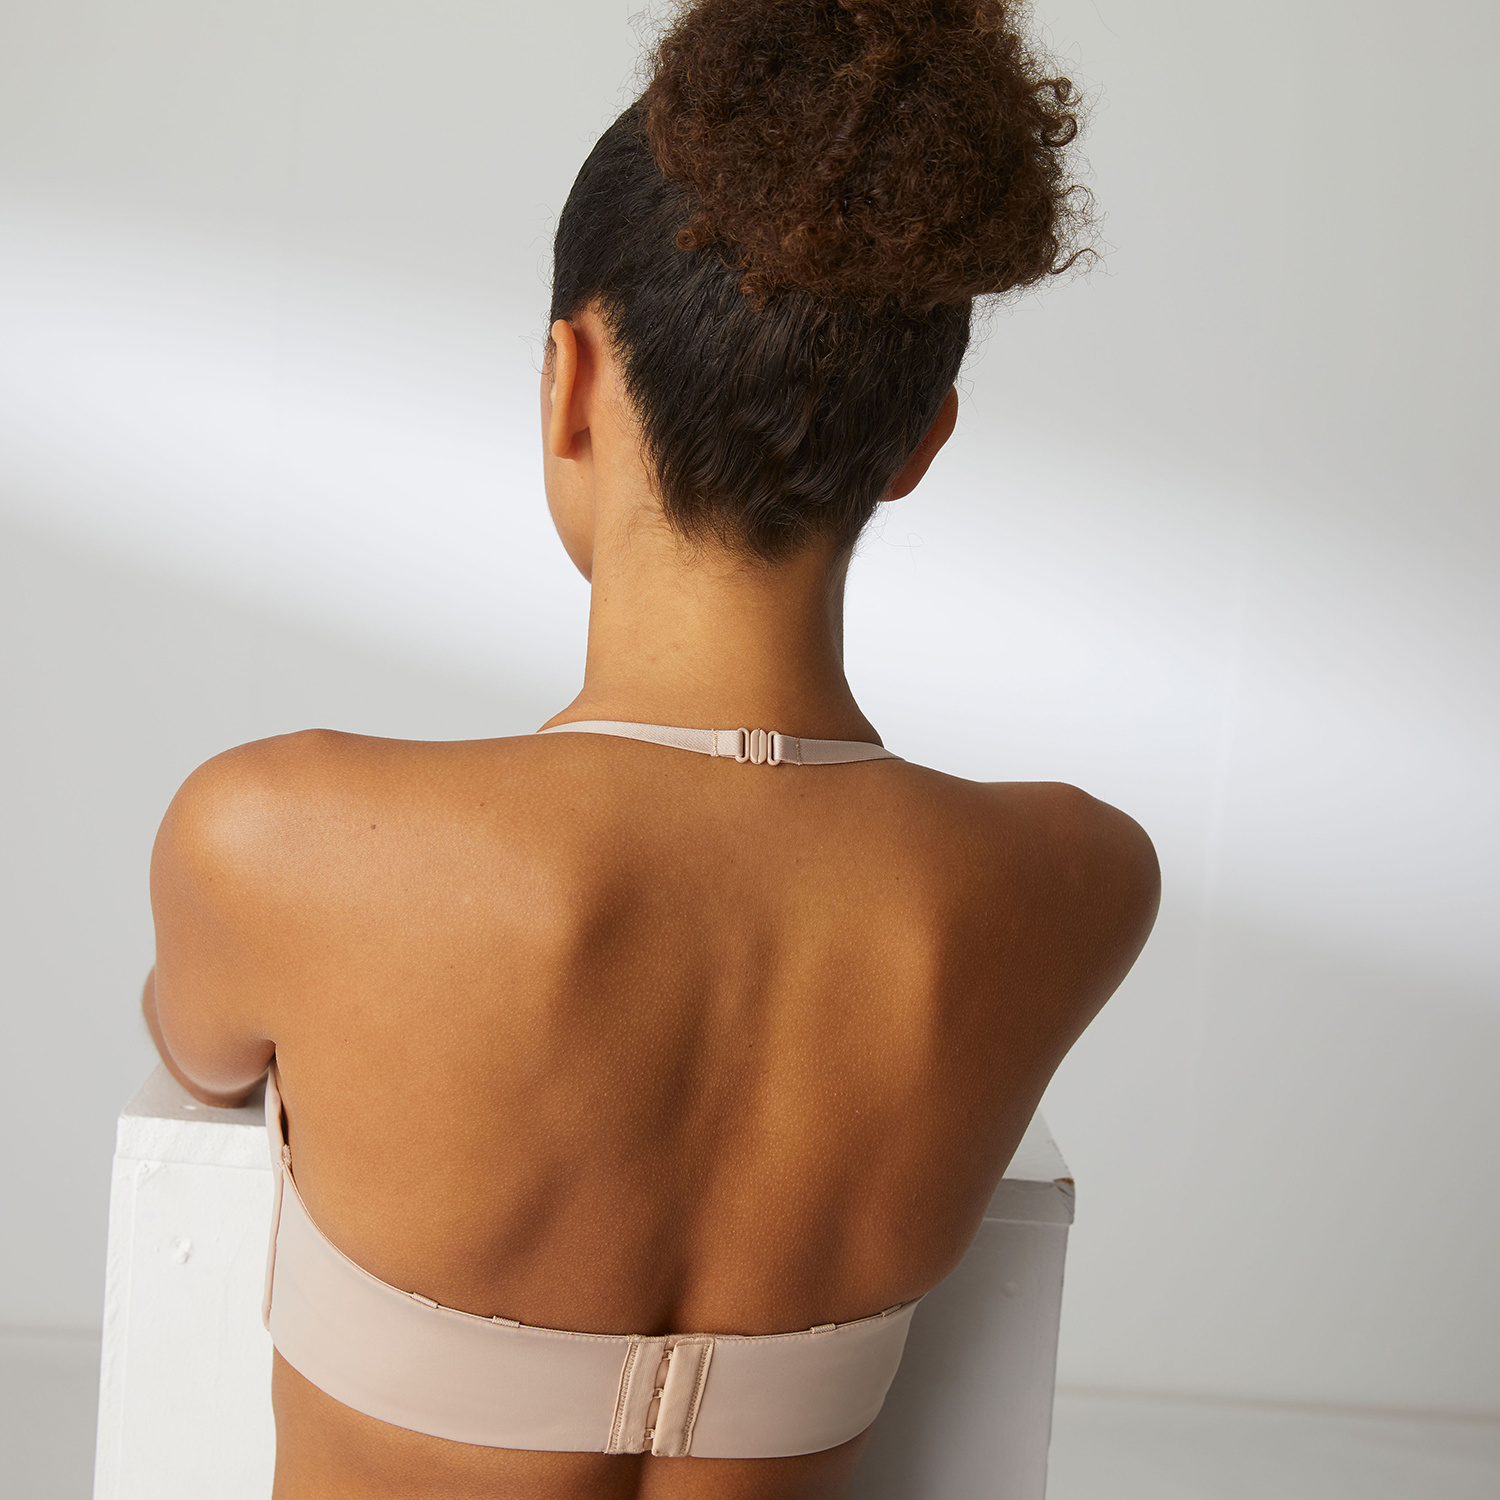  36A Clear Back Strap Bra For Strapless And Backless